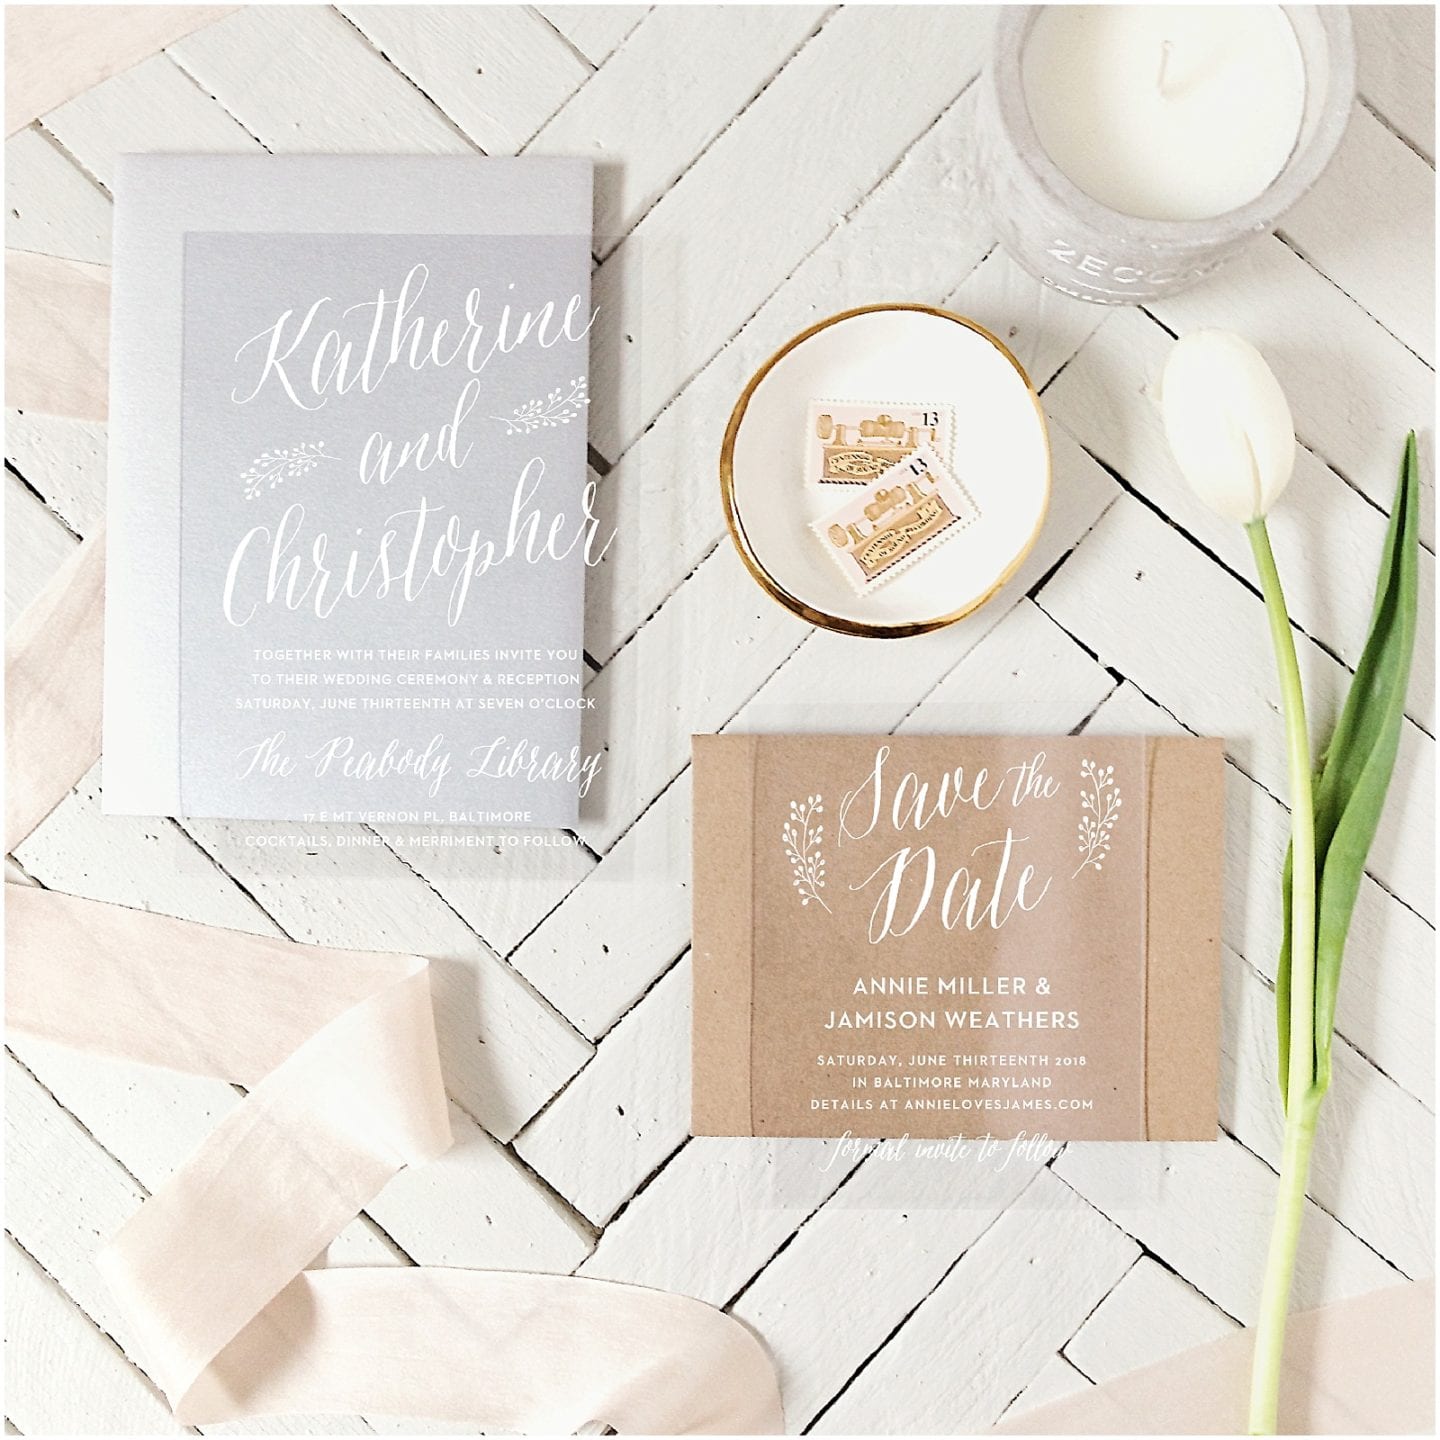 Rustic Save the Date Cards Birth Announcements and Family Holiday Cards by Basic Invite